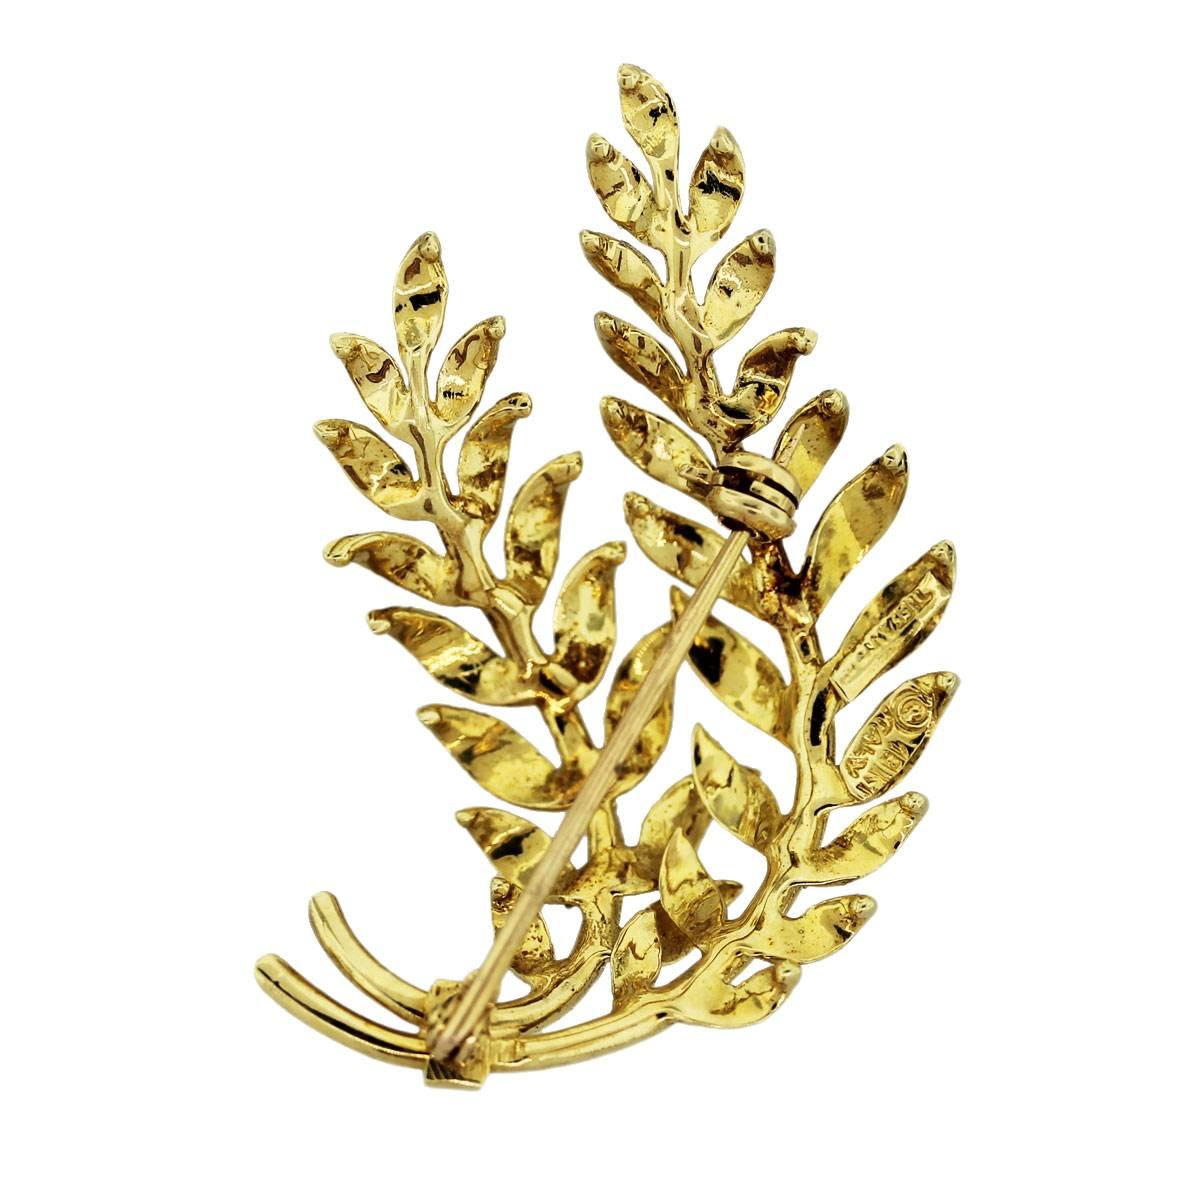 Style: 18k Yellow Gold Leaf Pin
Material: 18K Yellow Gold
Measurements: 1.75'' x 1.25''
Total Weight: 7.7g (5dwt)
Additional Details: Comes with a Raymond Lee Jewelers Presentation Box